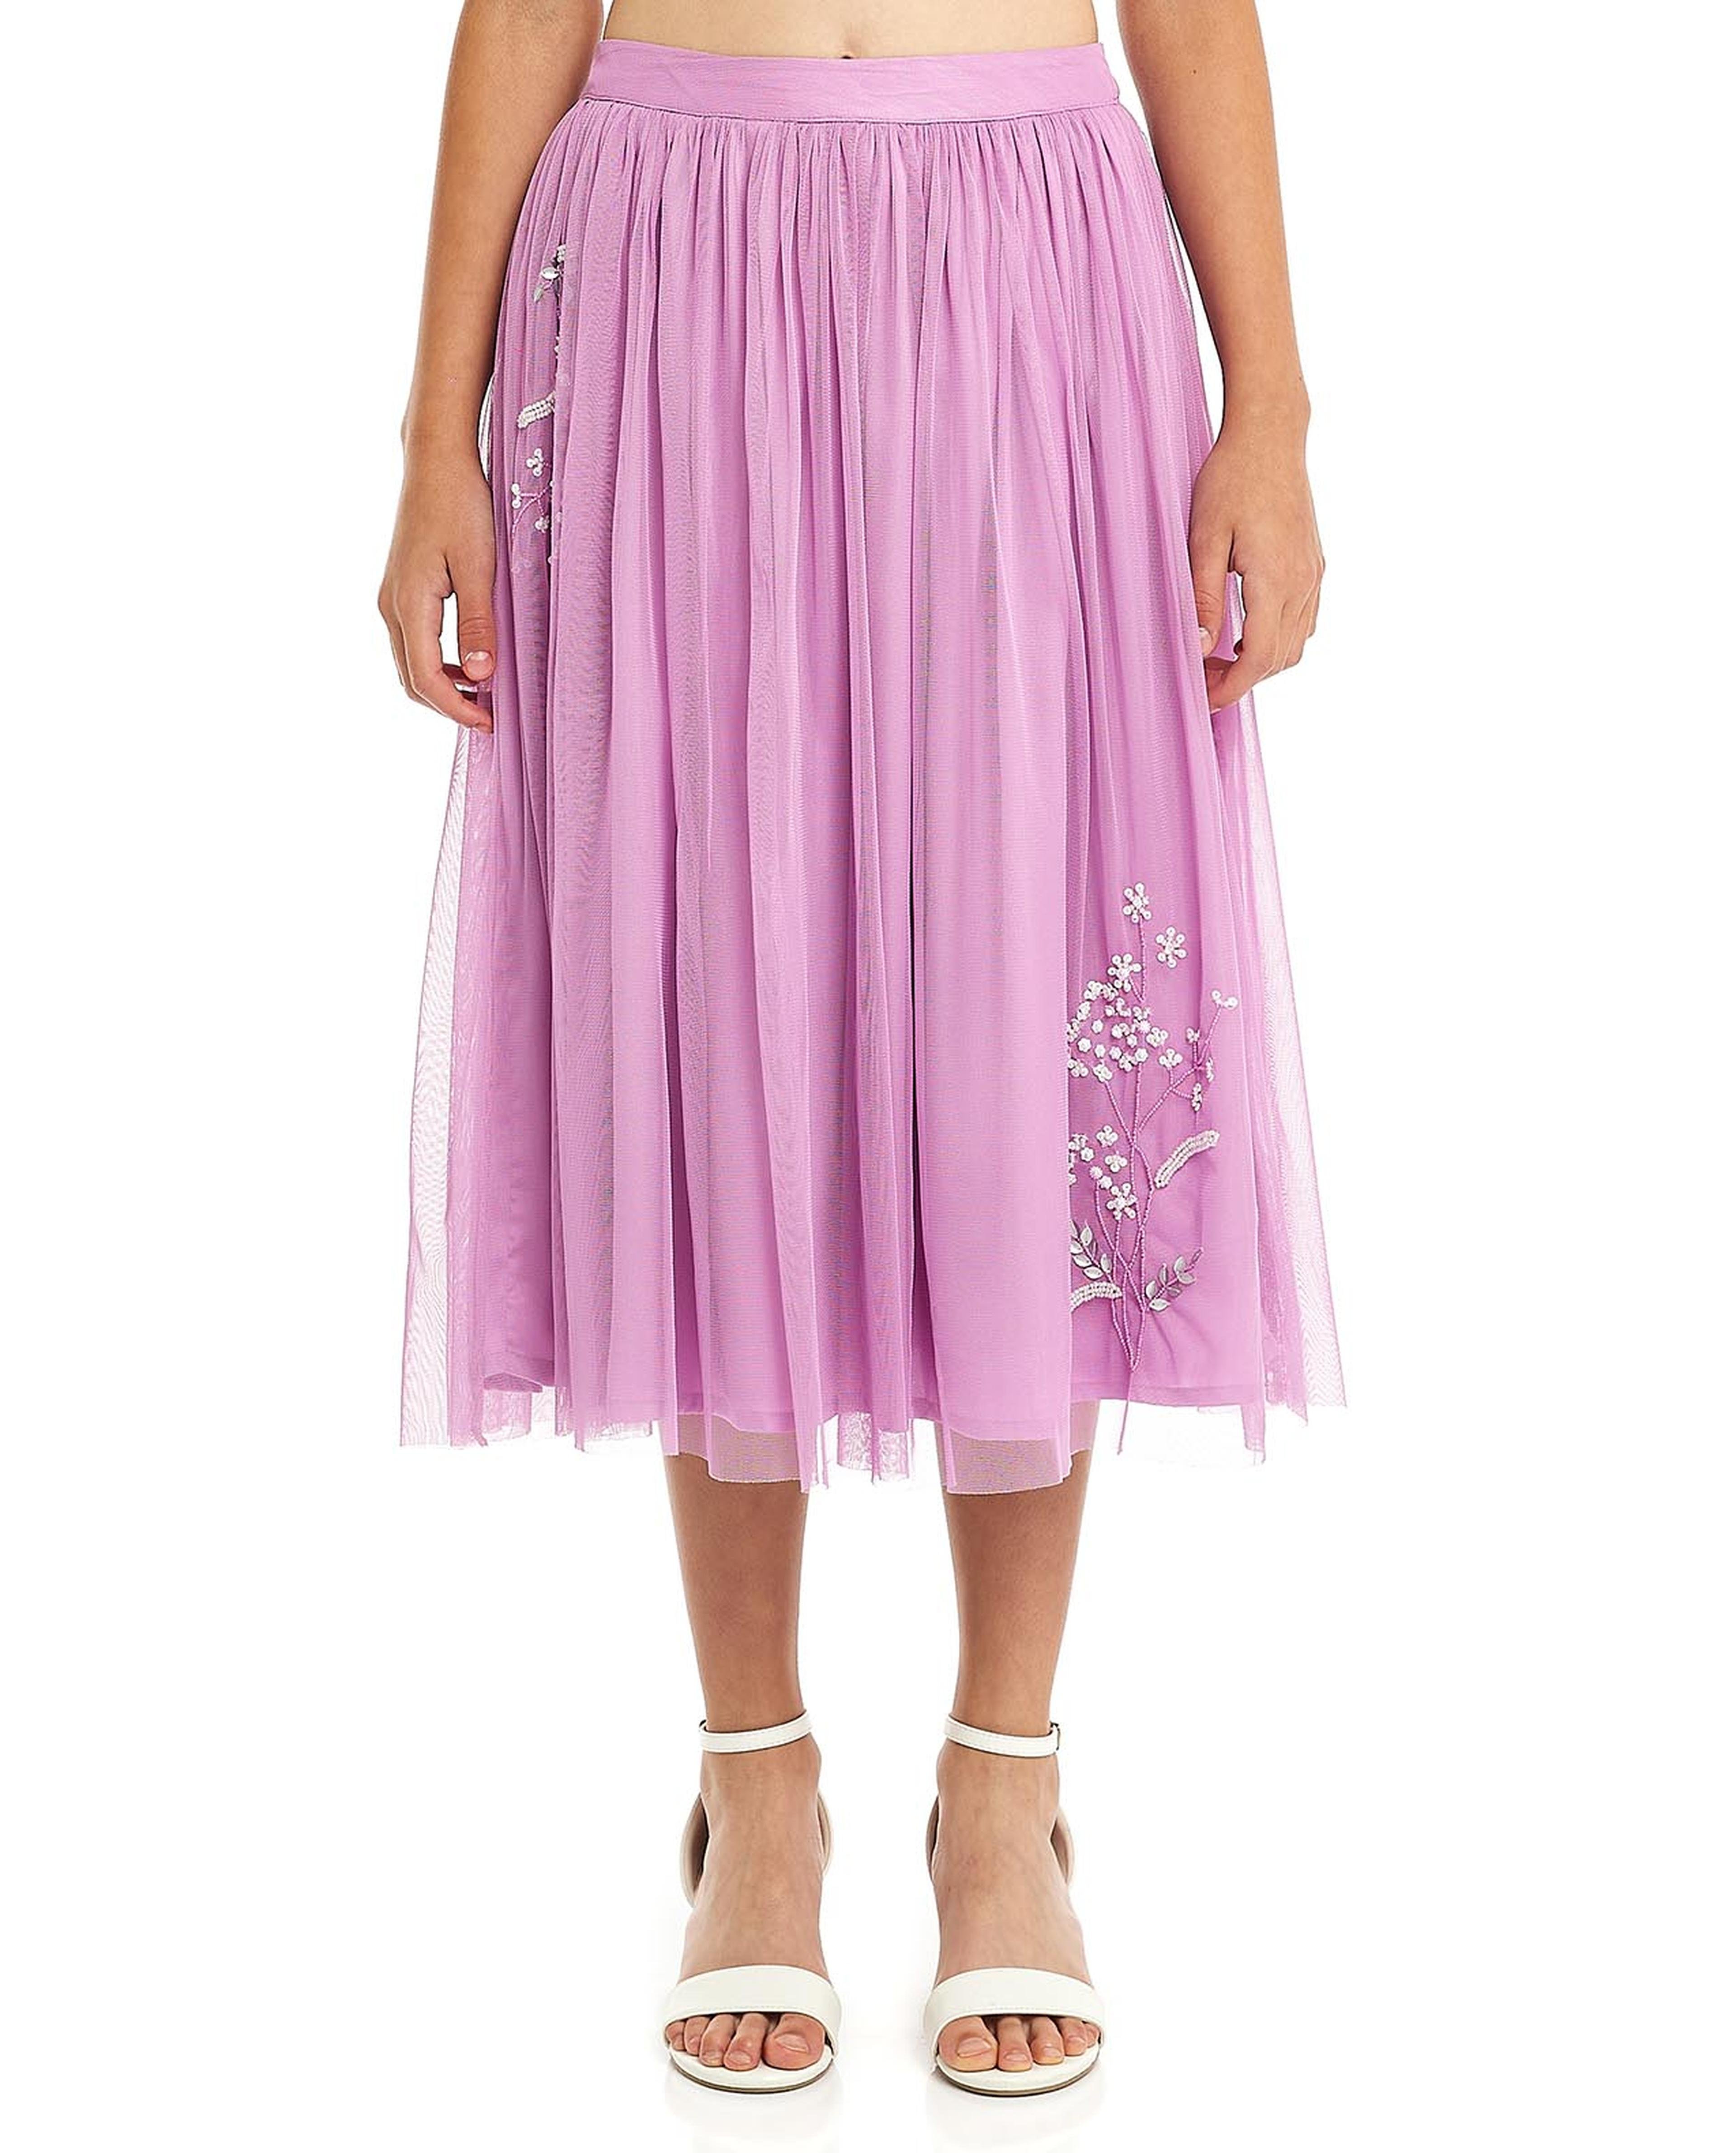 Embroidered Top and Tulle Skirt Set